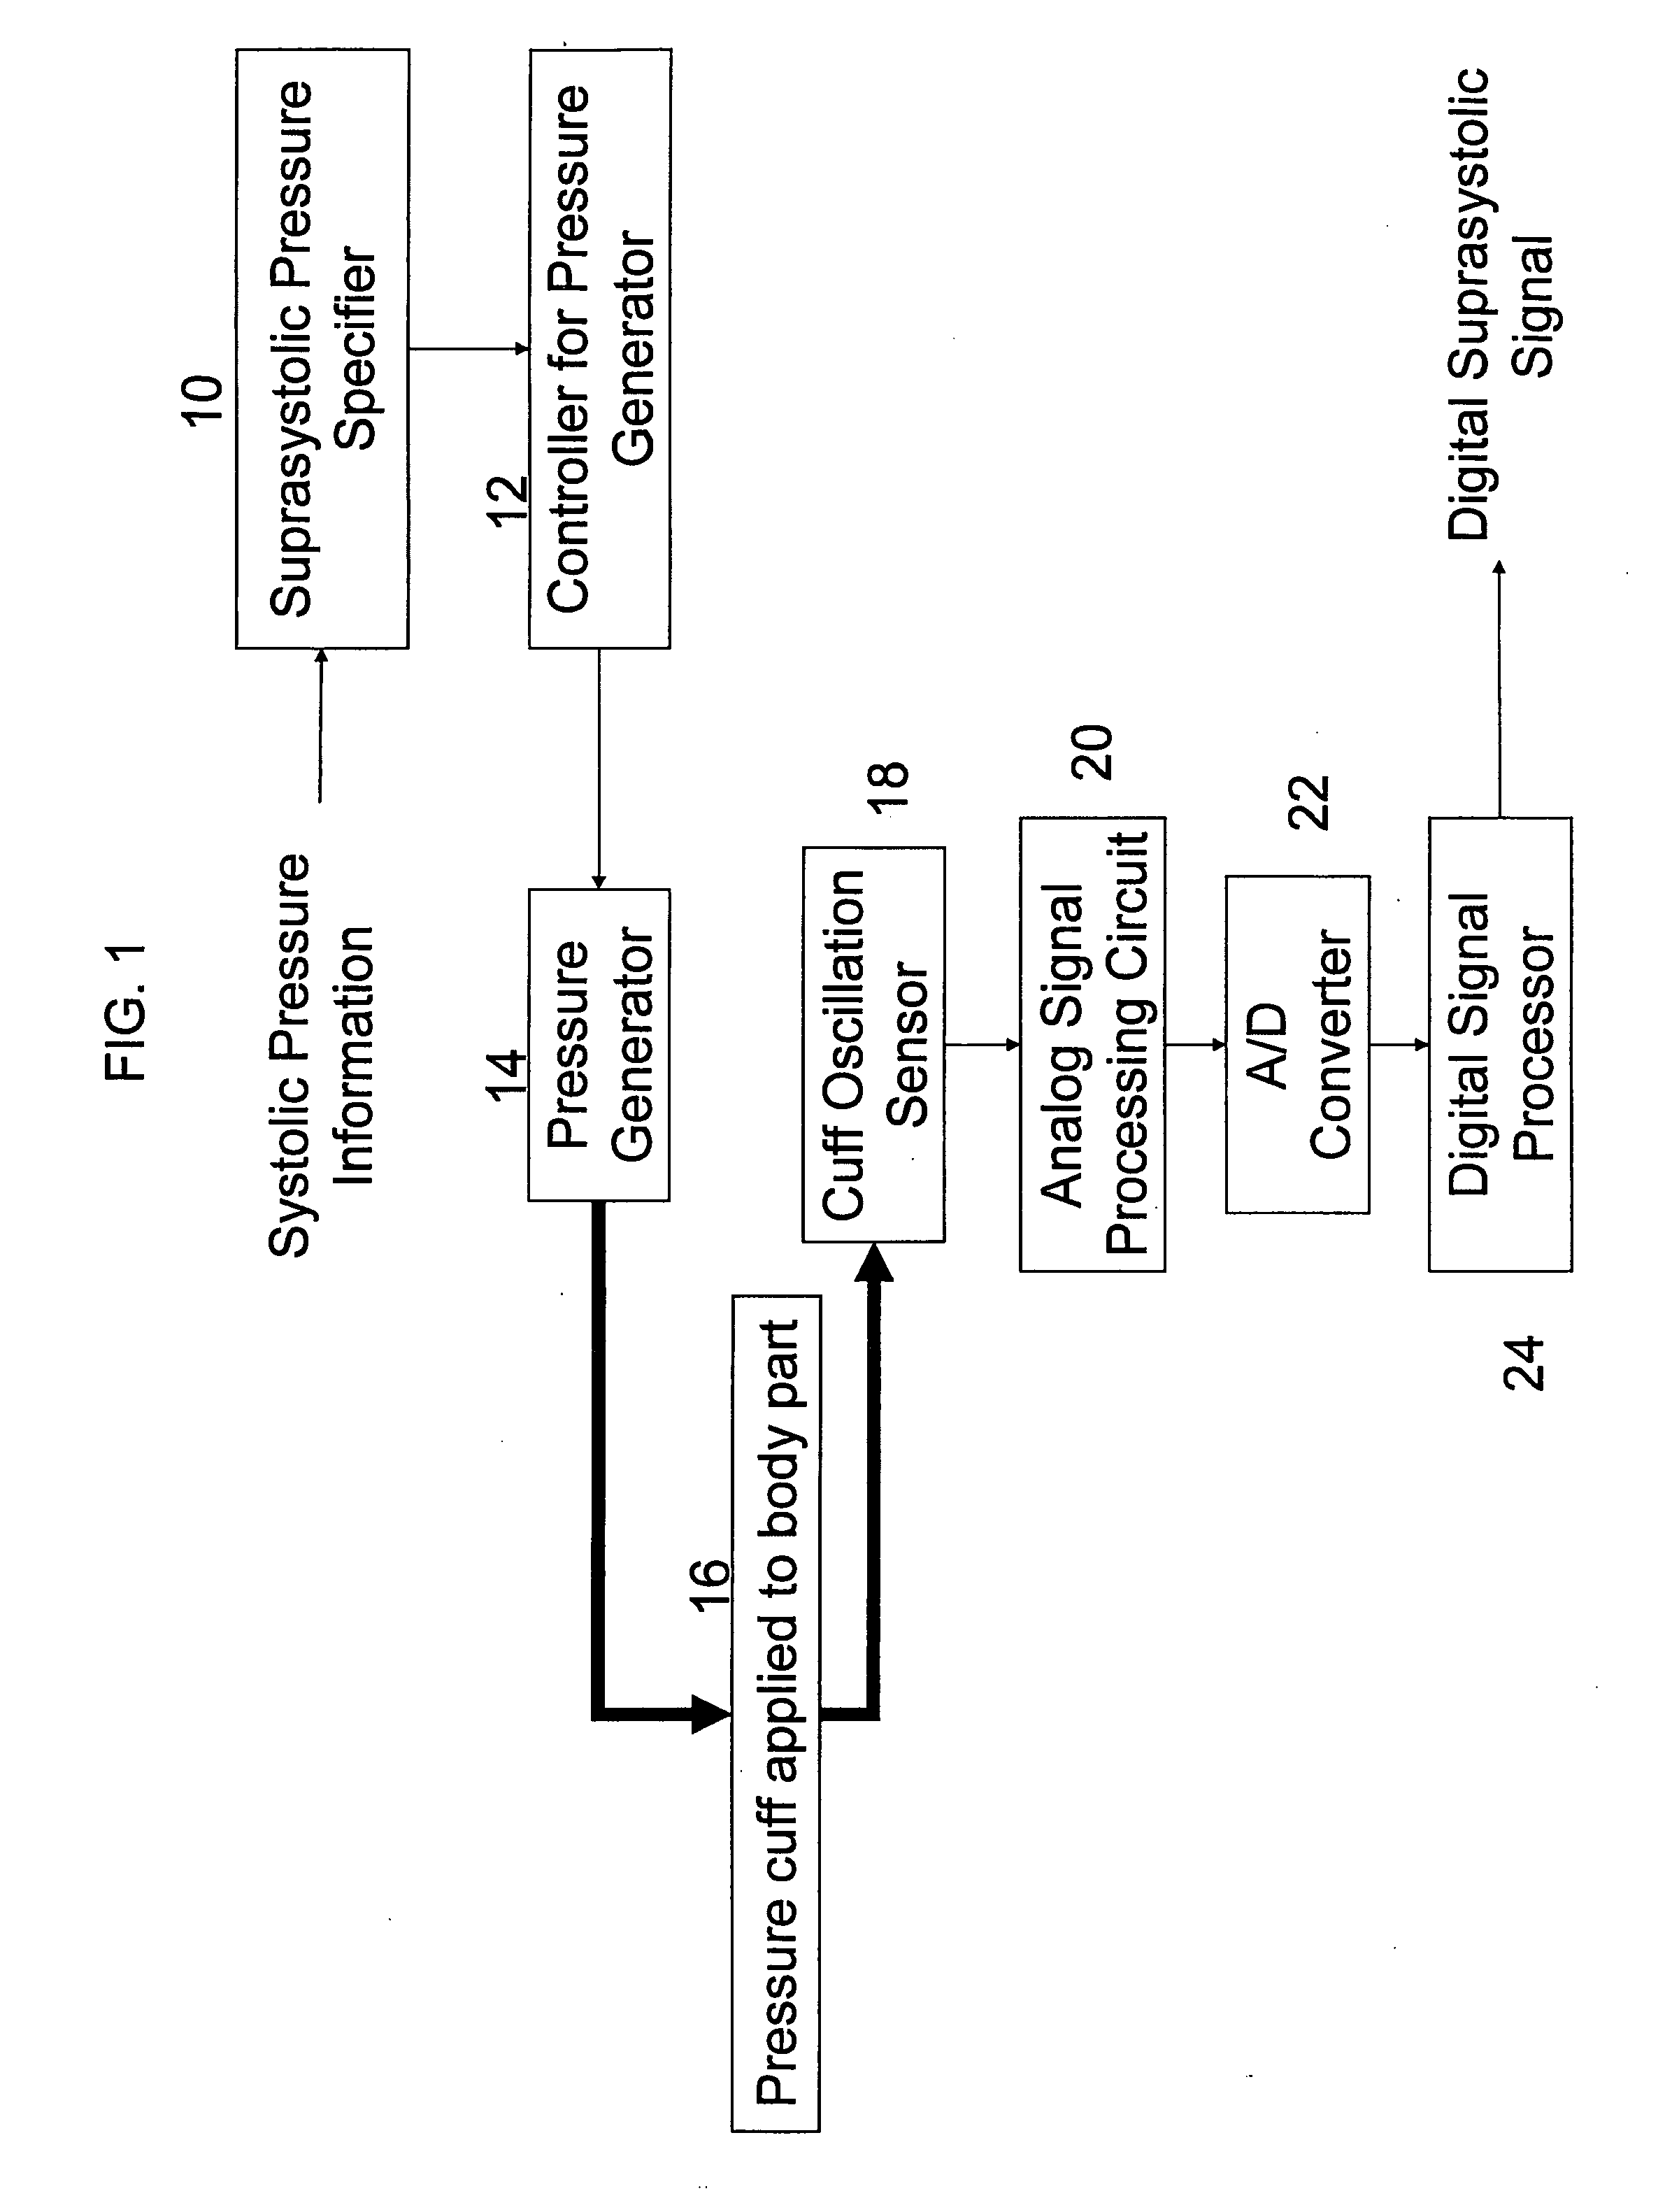 Method and apparatus for obtaining electronic oscillotory pressure signals from an inflatable blood pressure cuff